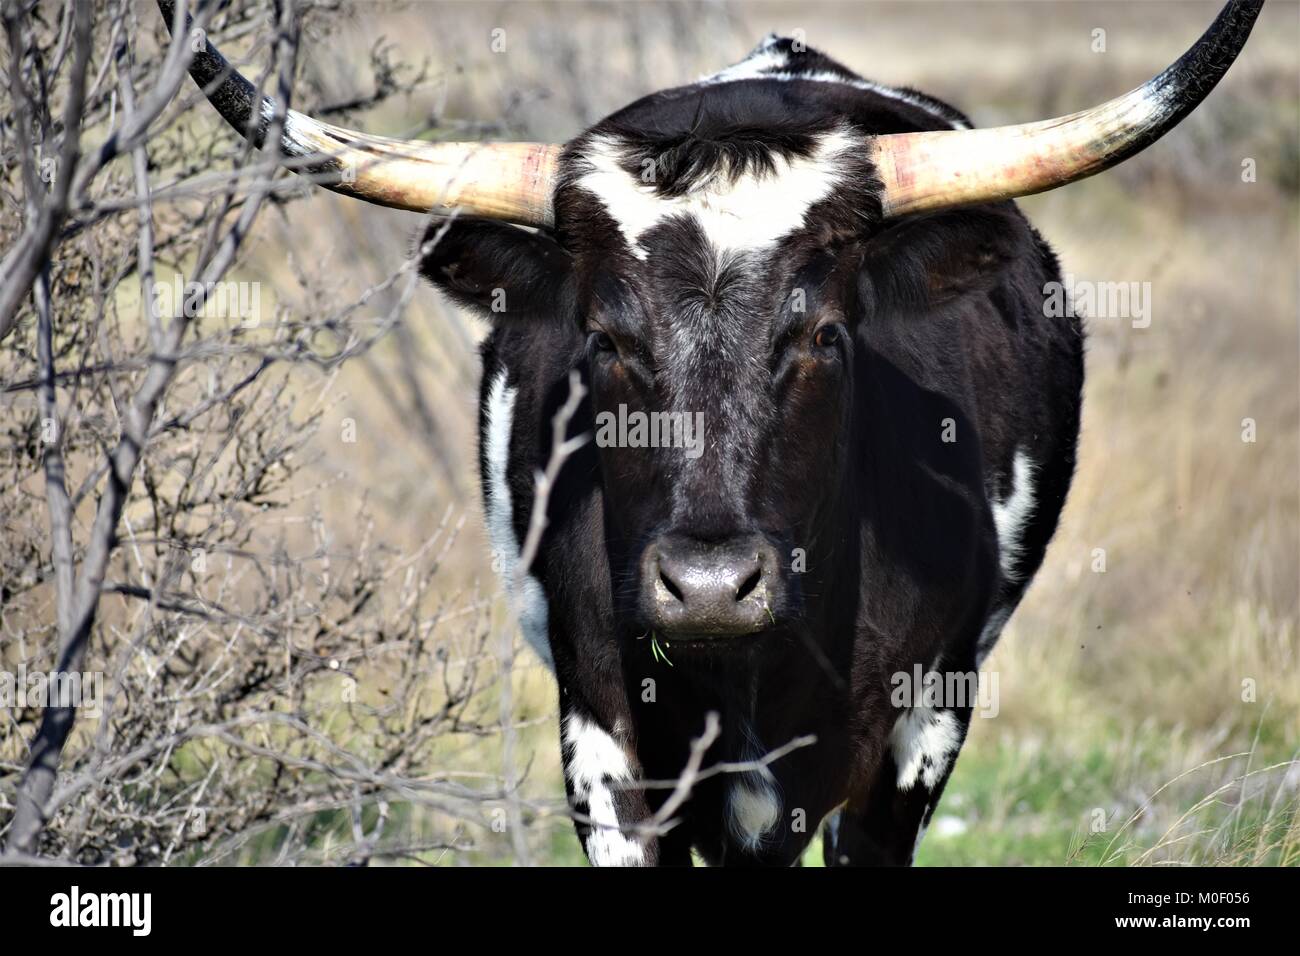 Black cow in the field Stock Photo